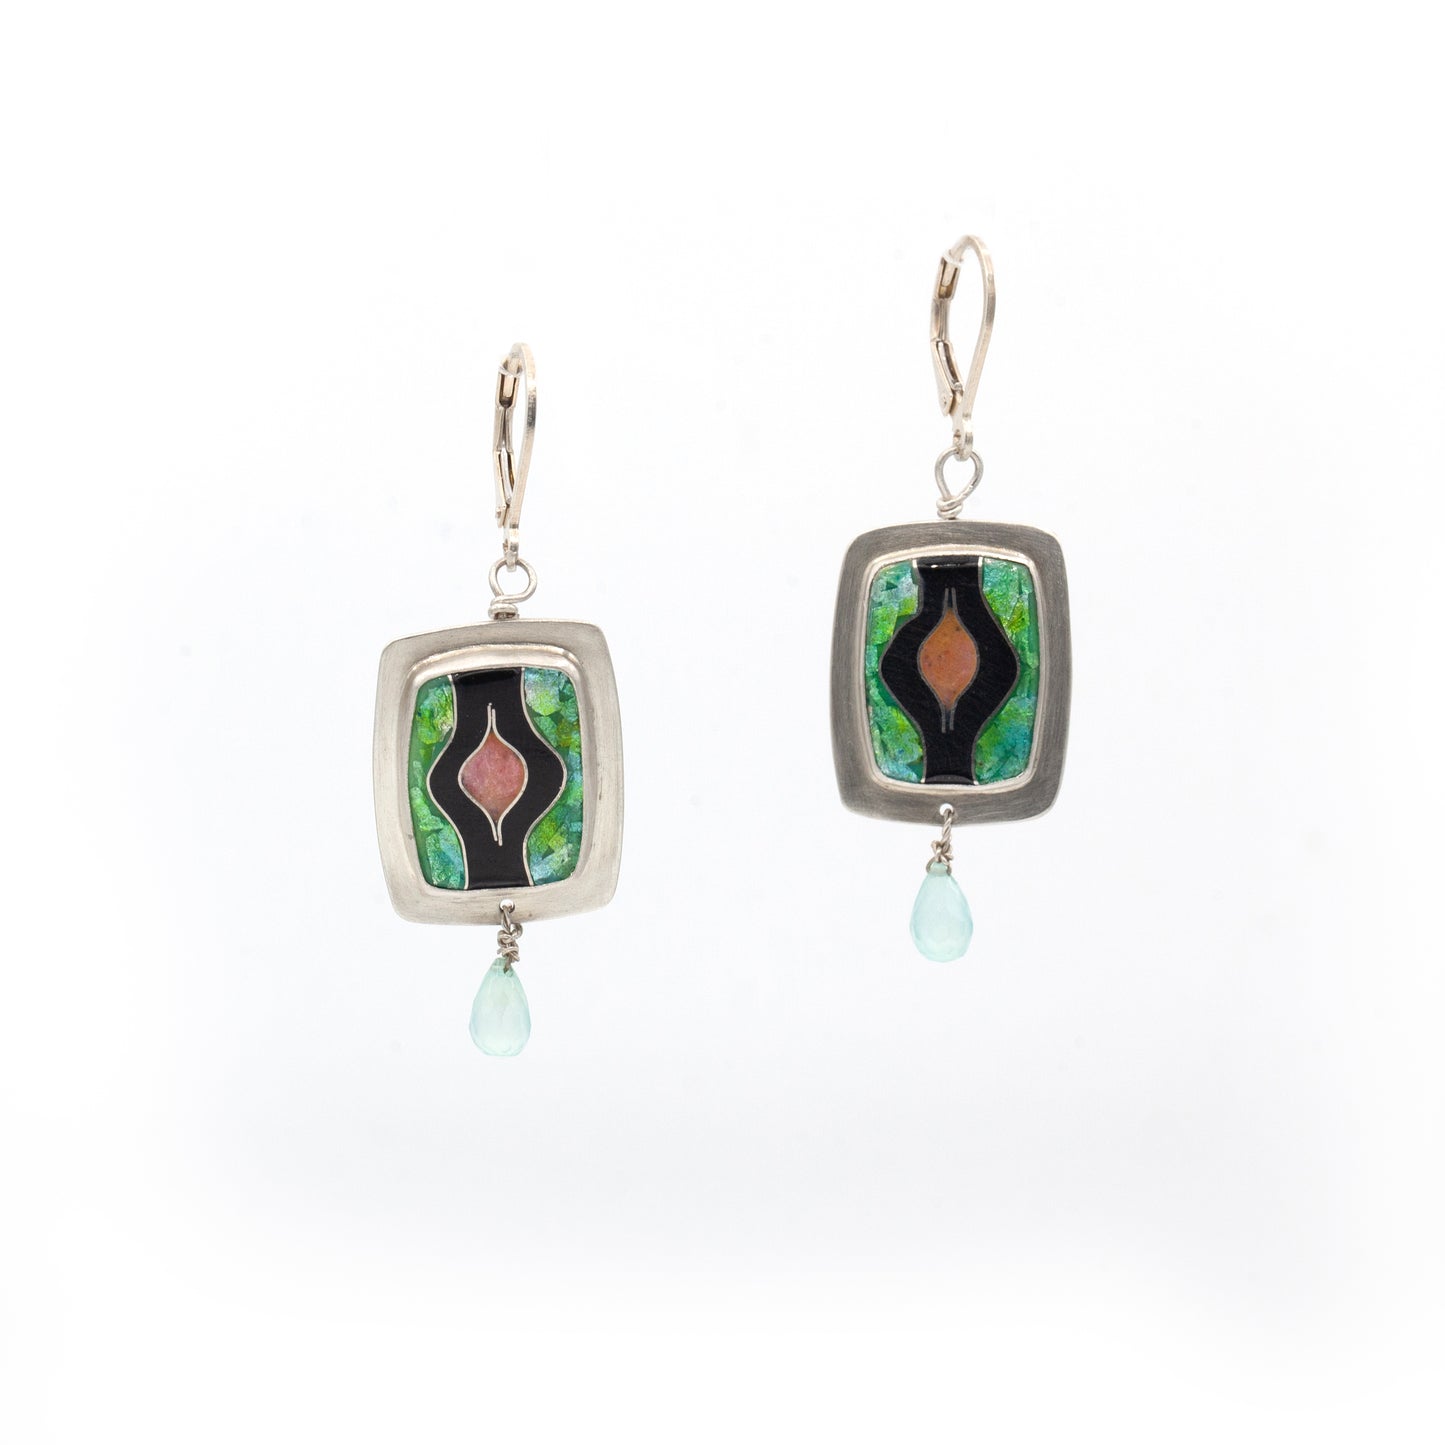 Vitrice McMurry Sterling Silver Cloisonne Earrings with Chalcedony